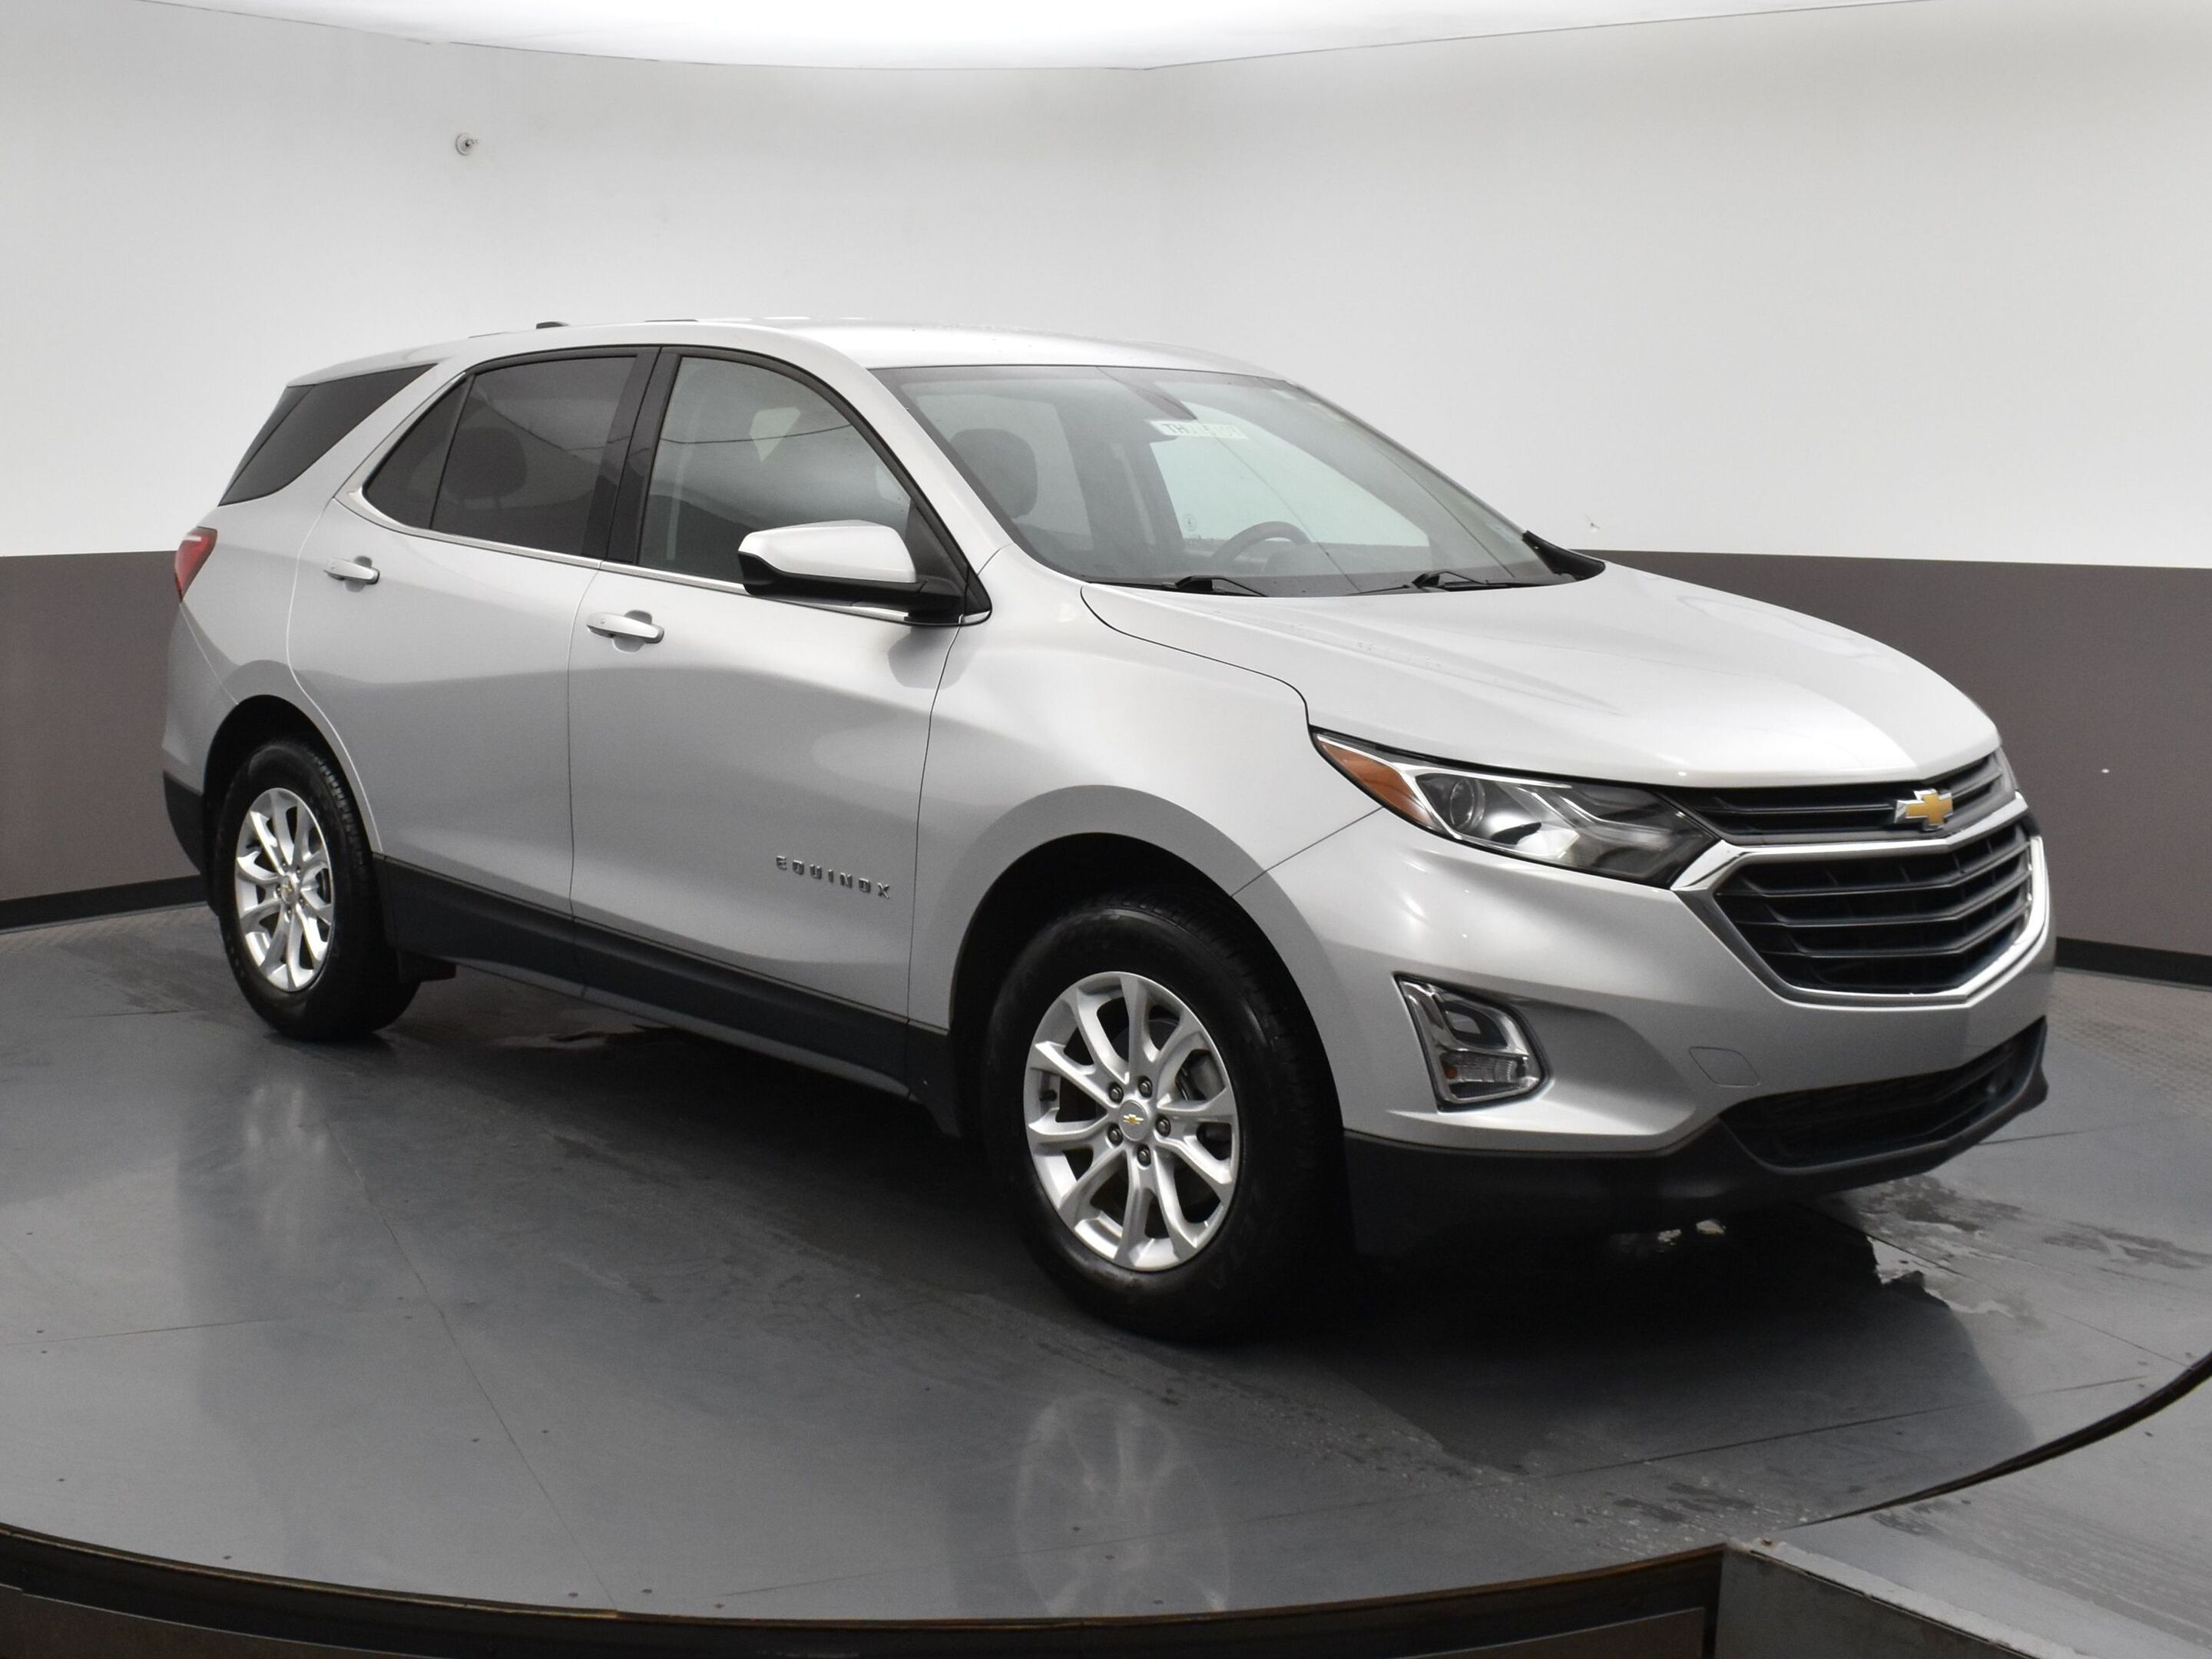 2019 Chevrolet Equinox LT AWD LEATHER, HEATED SEATS, FACTORY REMOTE START